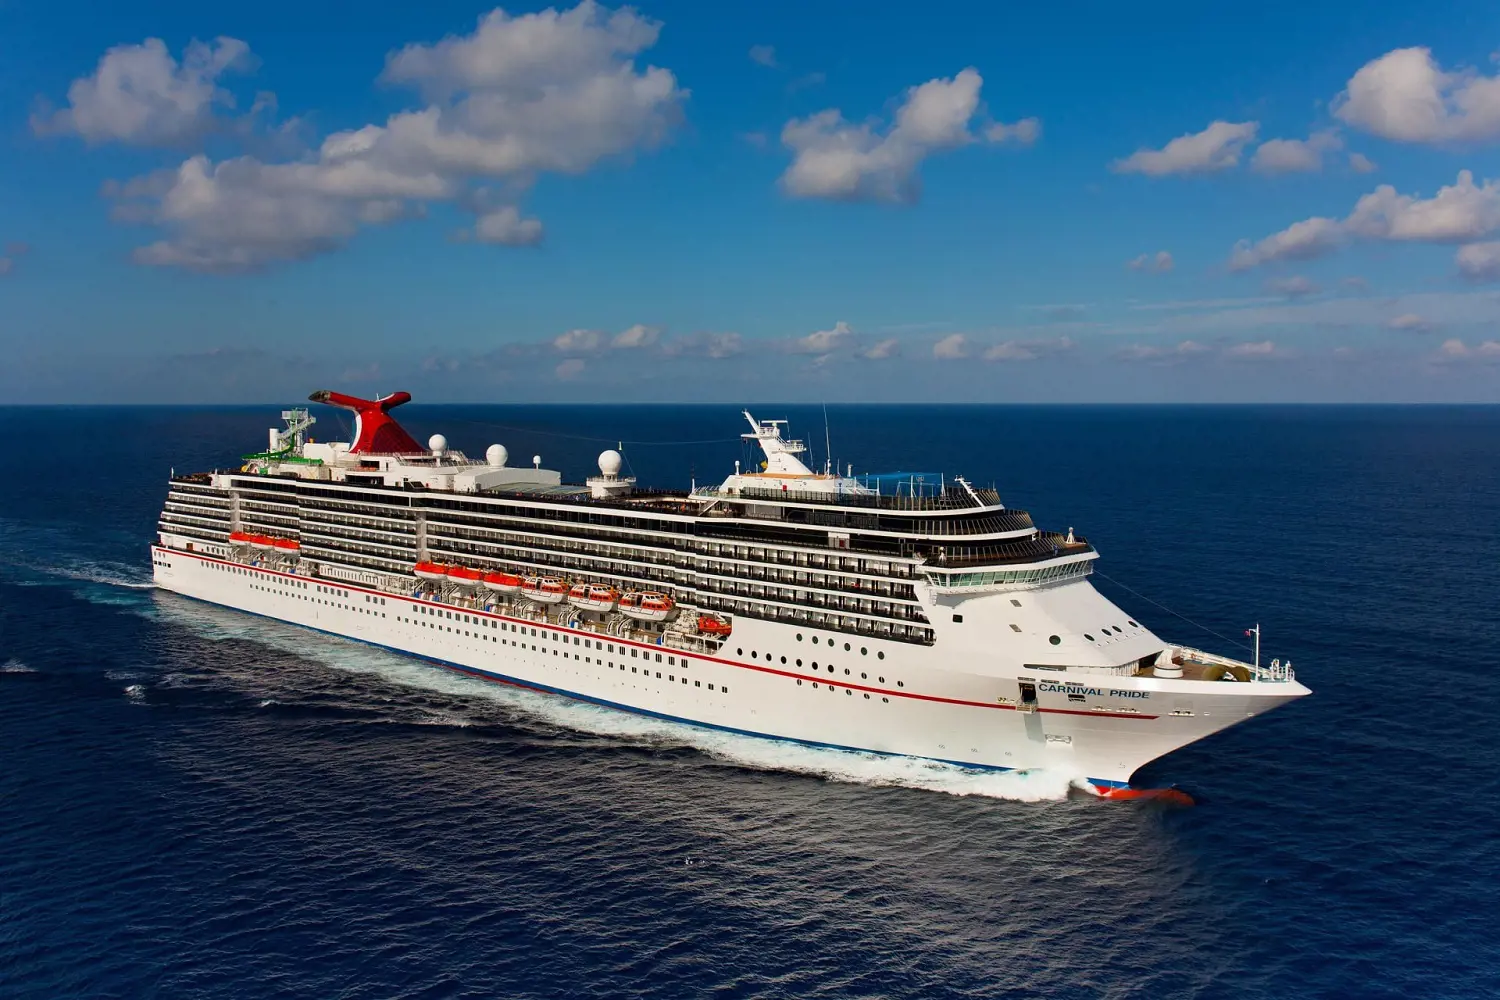 Carnival Cruise Line is owned by Carnival Corporation & plc